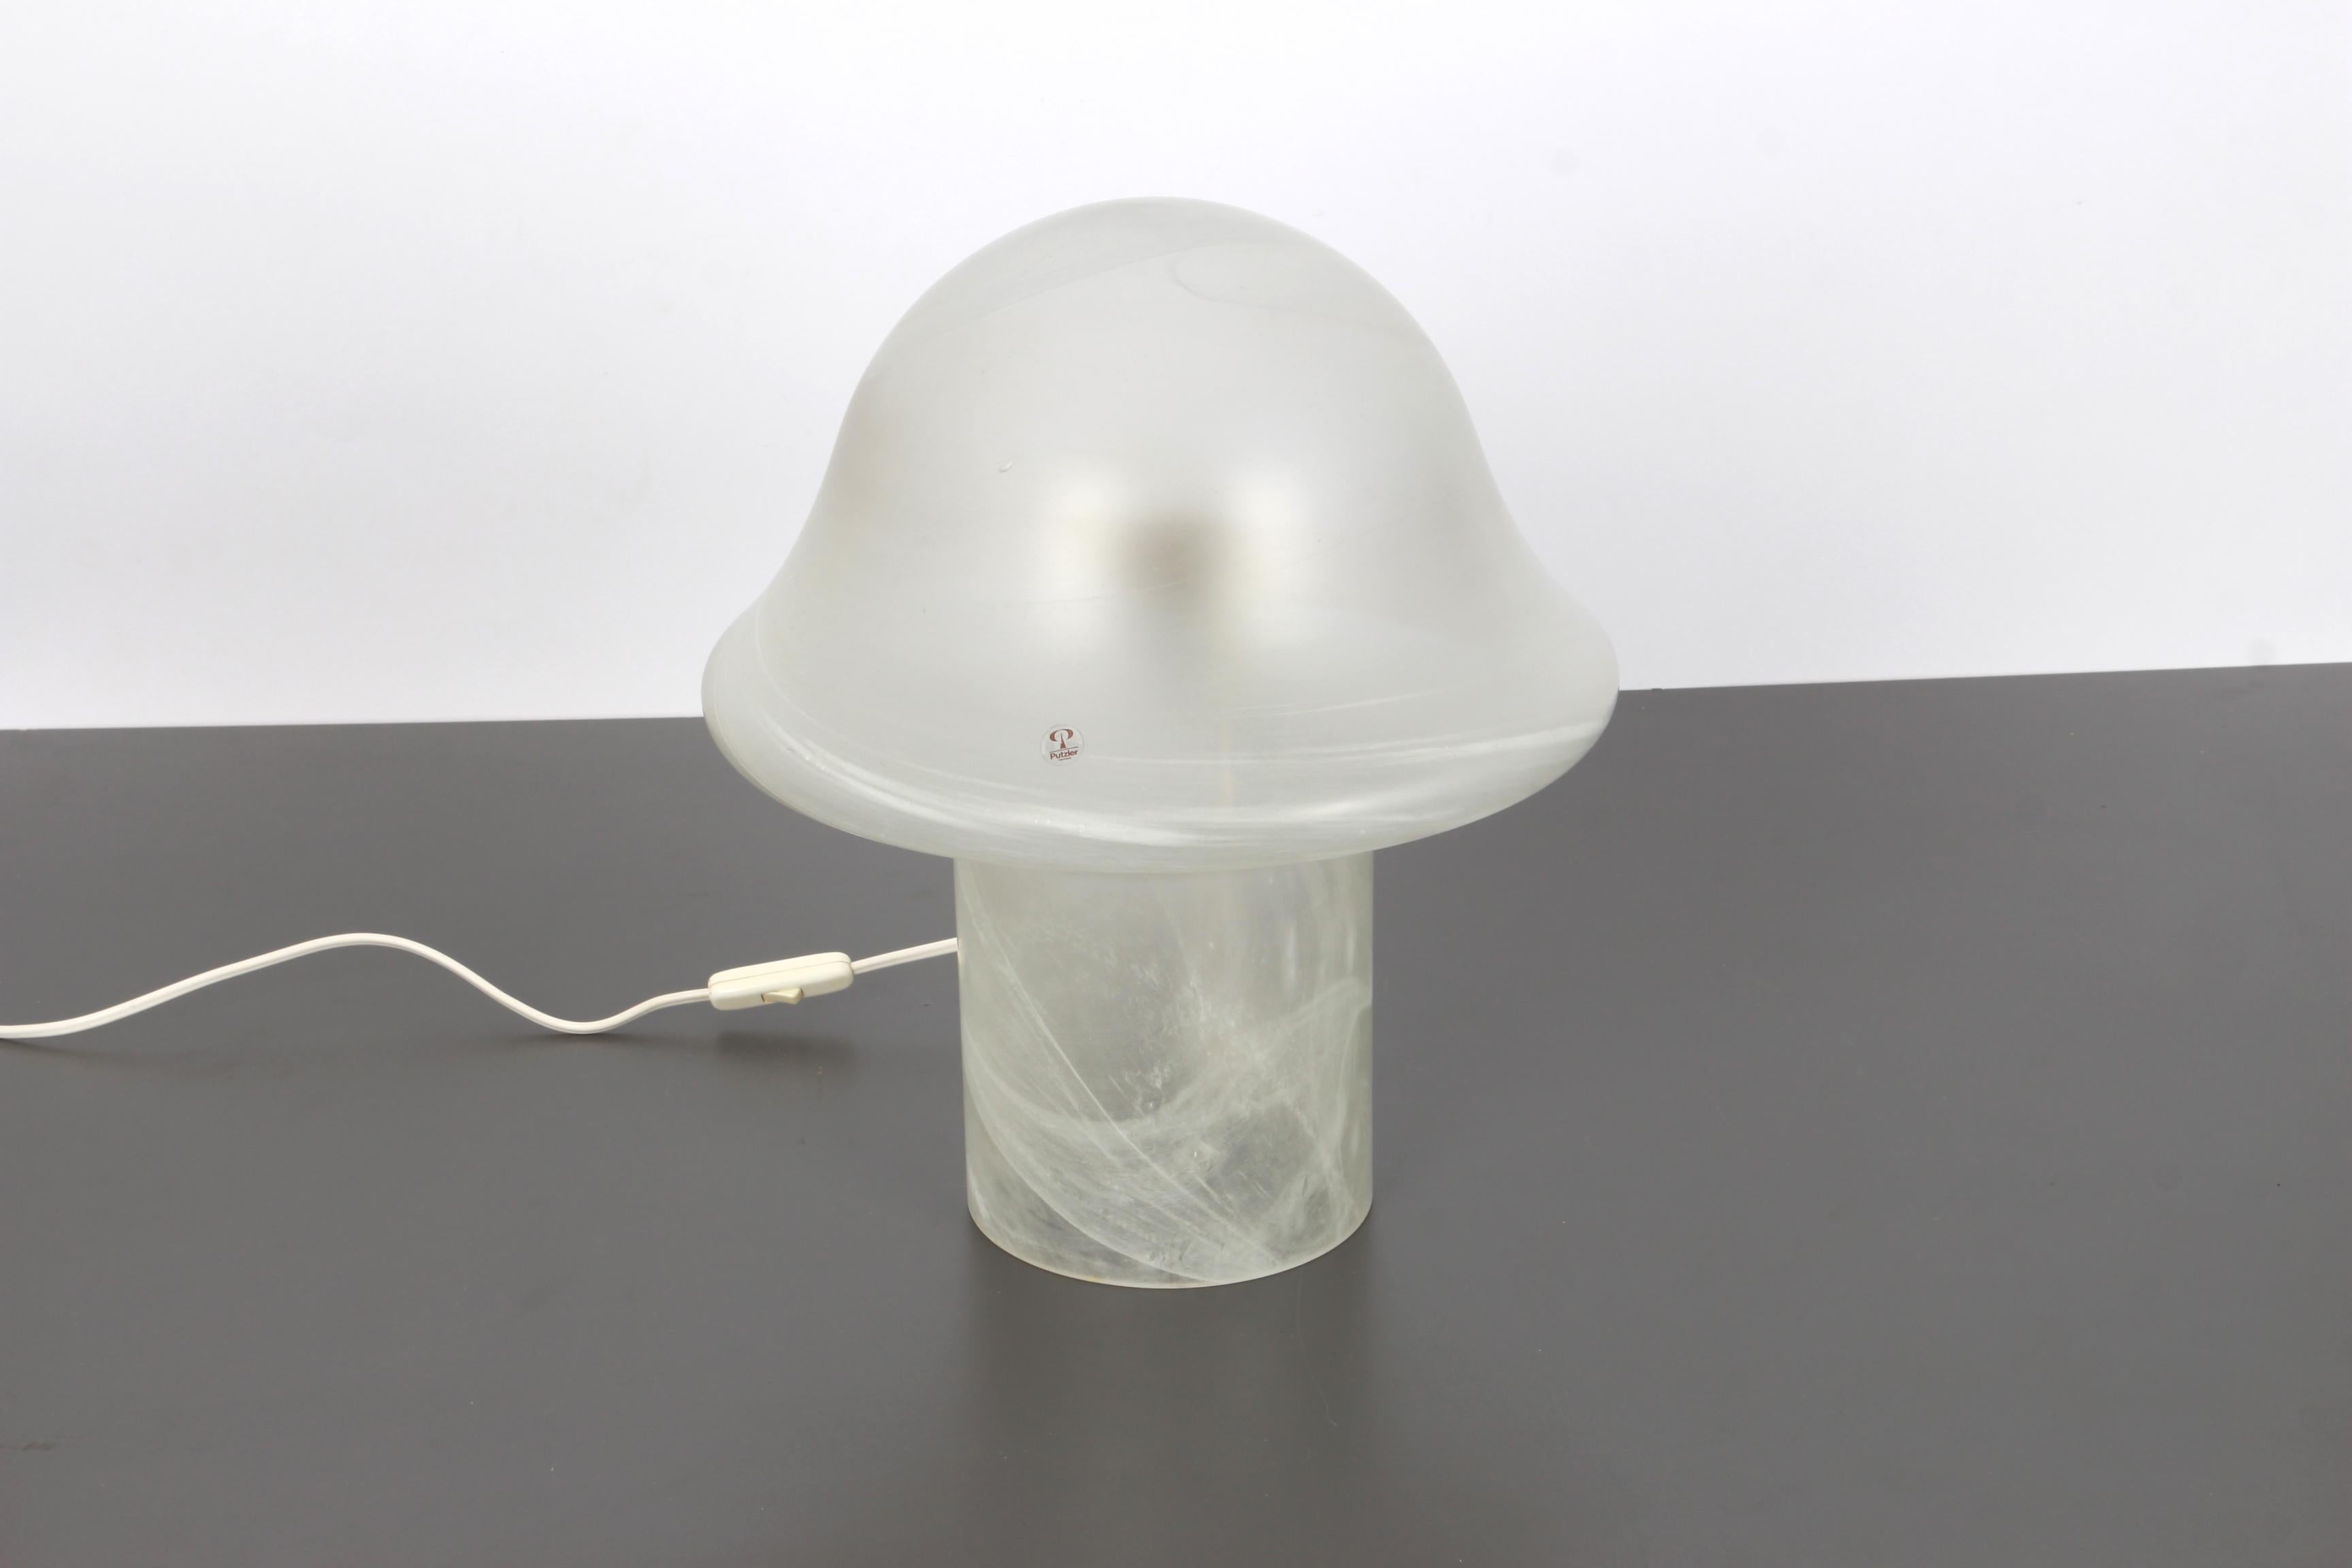 Wonderful mushroom table lamp by Peill & Putzler, Germany, 1970s. Made of a single piece.
Great glass body and its edgy quality contrasts nicely with the smooth surface and shape of the mushroom. 

Measures: Large table lamp
Height 37 cm, 14.5